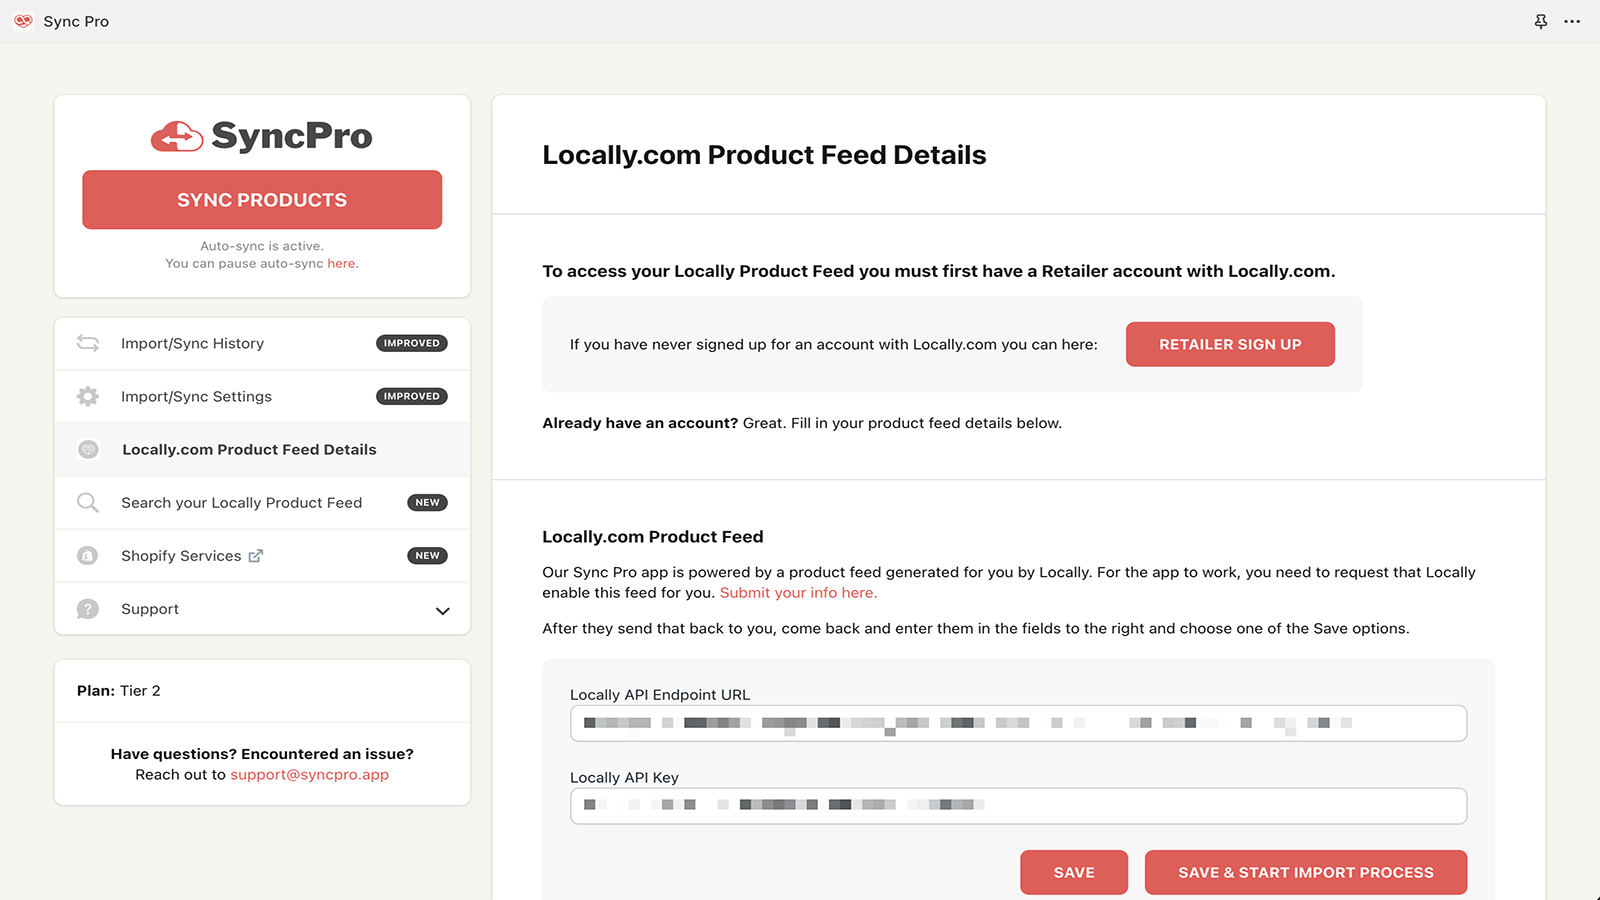 Locally.com Product Feed Details